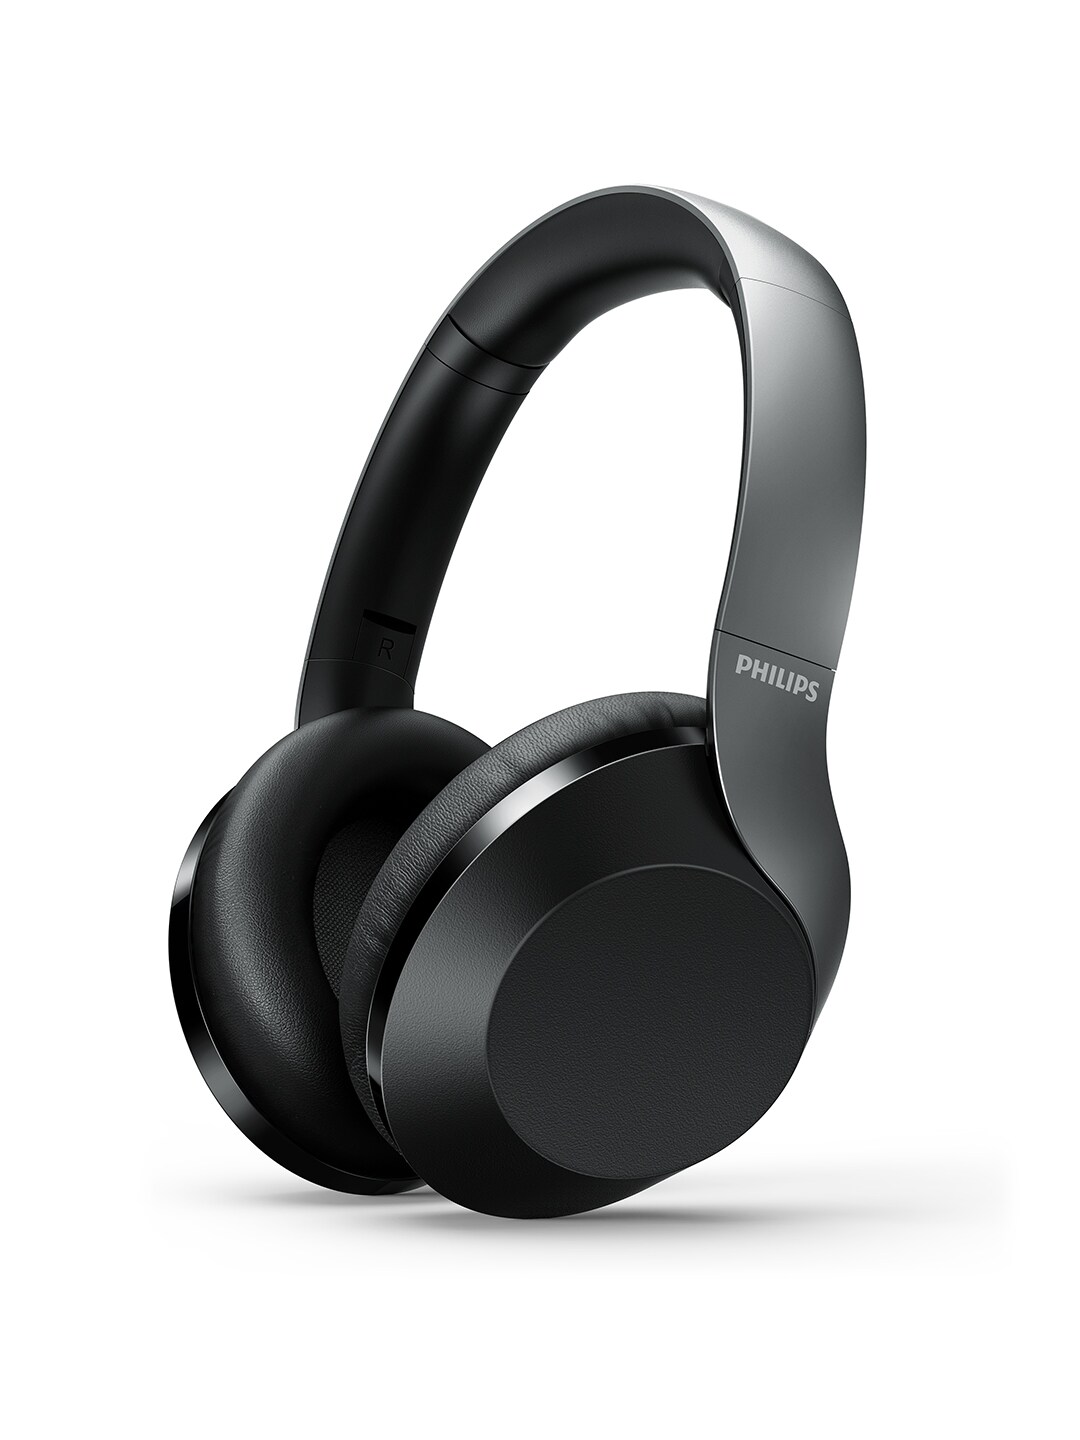 Philips Black Performance Wireless Headphones with Mic TAPH805BK Price in India